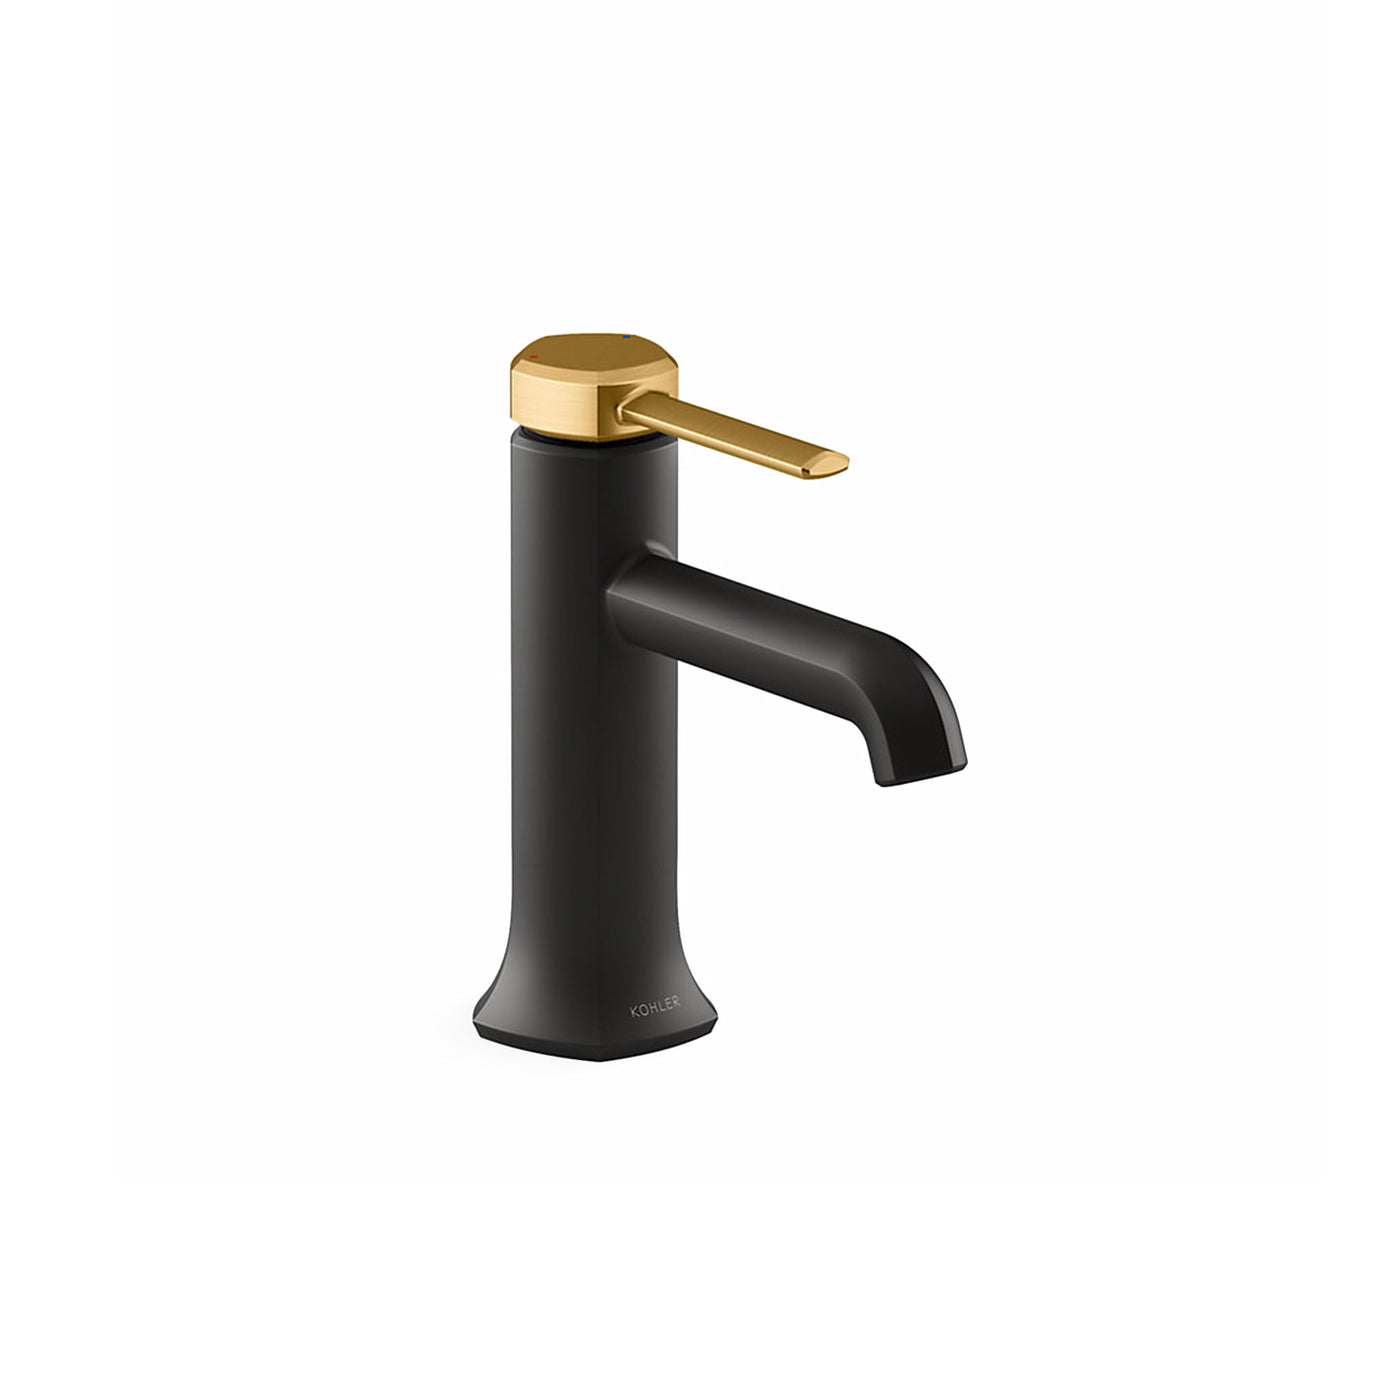 Occasion™ Single-handle bathroom sink faucet, 1.2 gpm